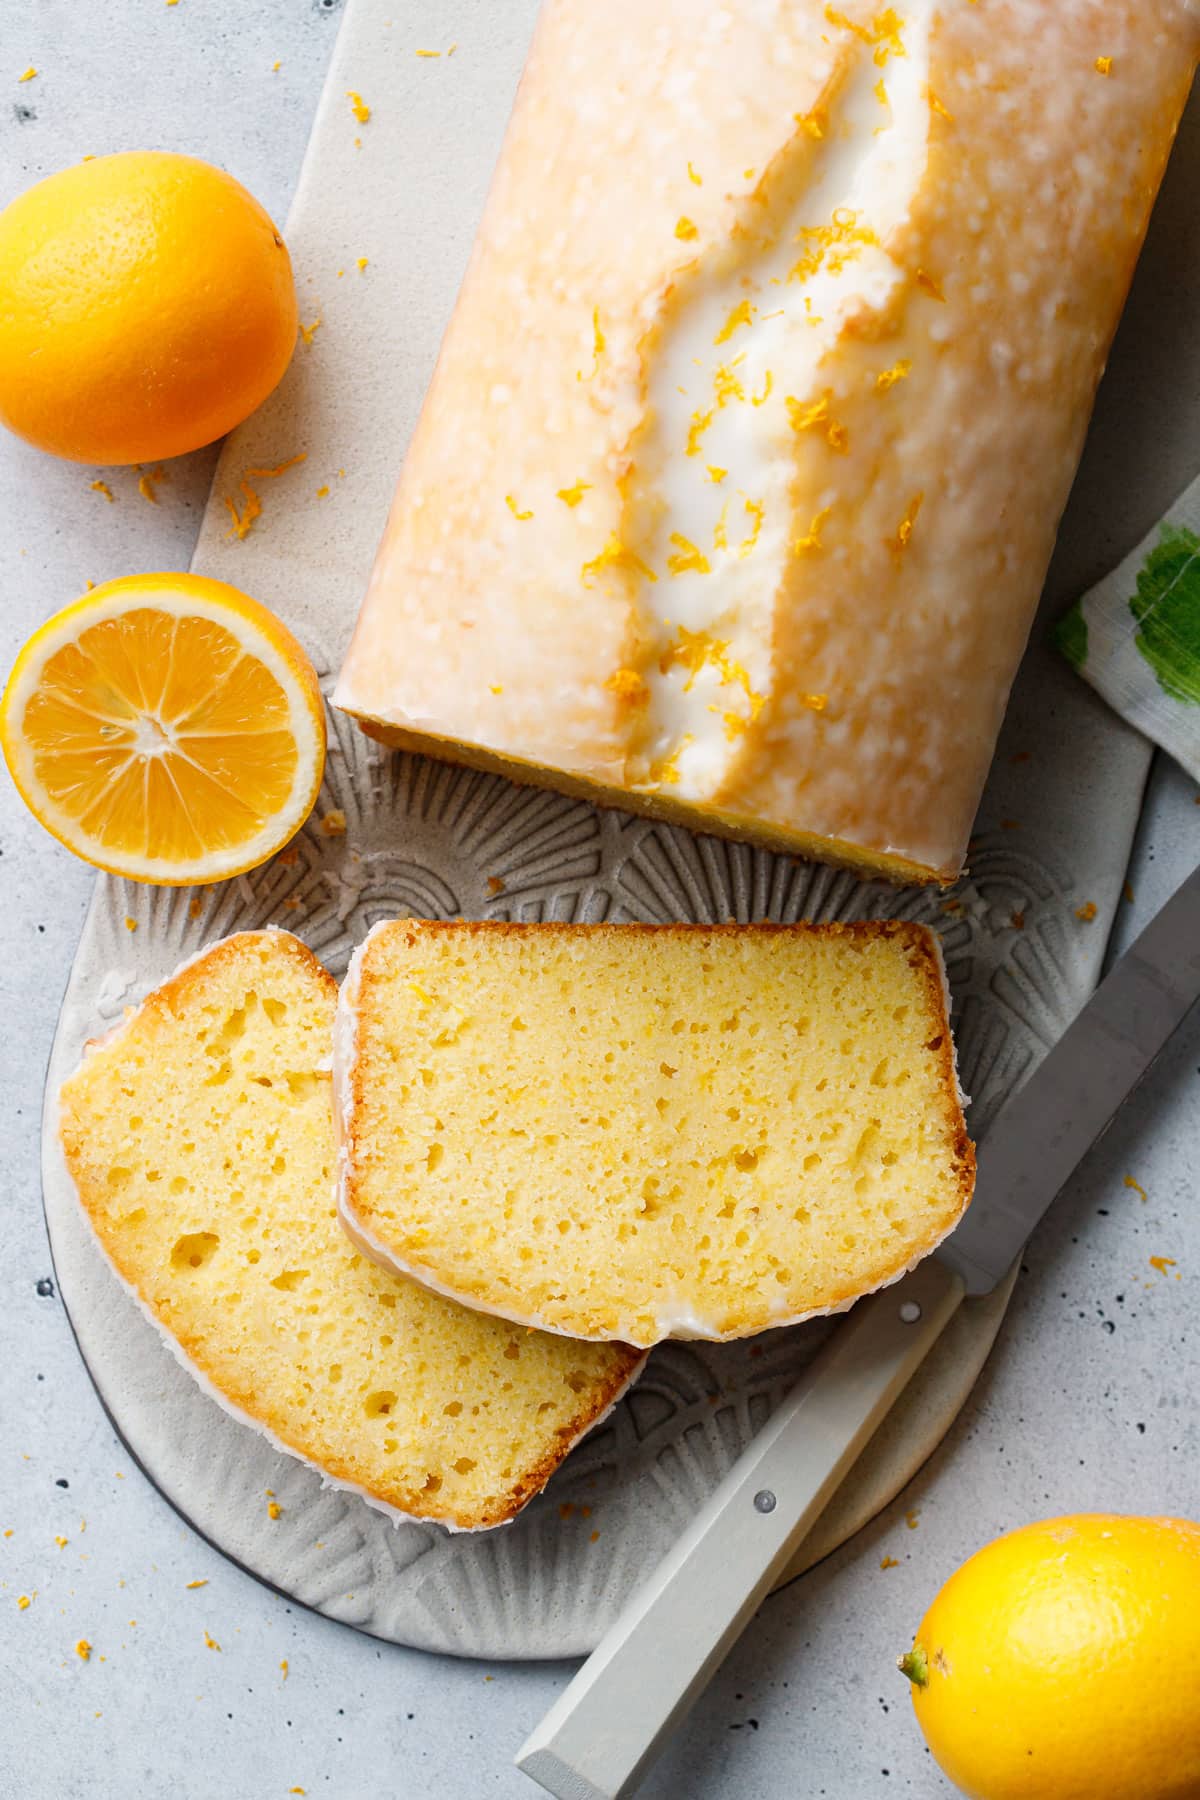 Overhead, two slices of Meyer Lemon Olive Oil Loaf Cake cut and laying down to show the interior texture, with Meyer lemons and a knife.